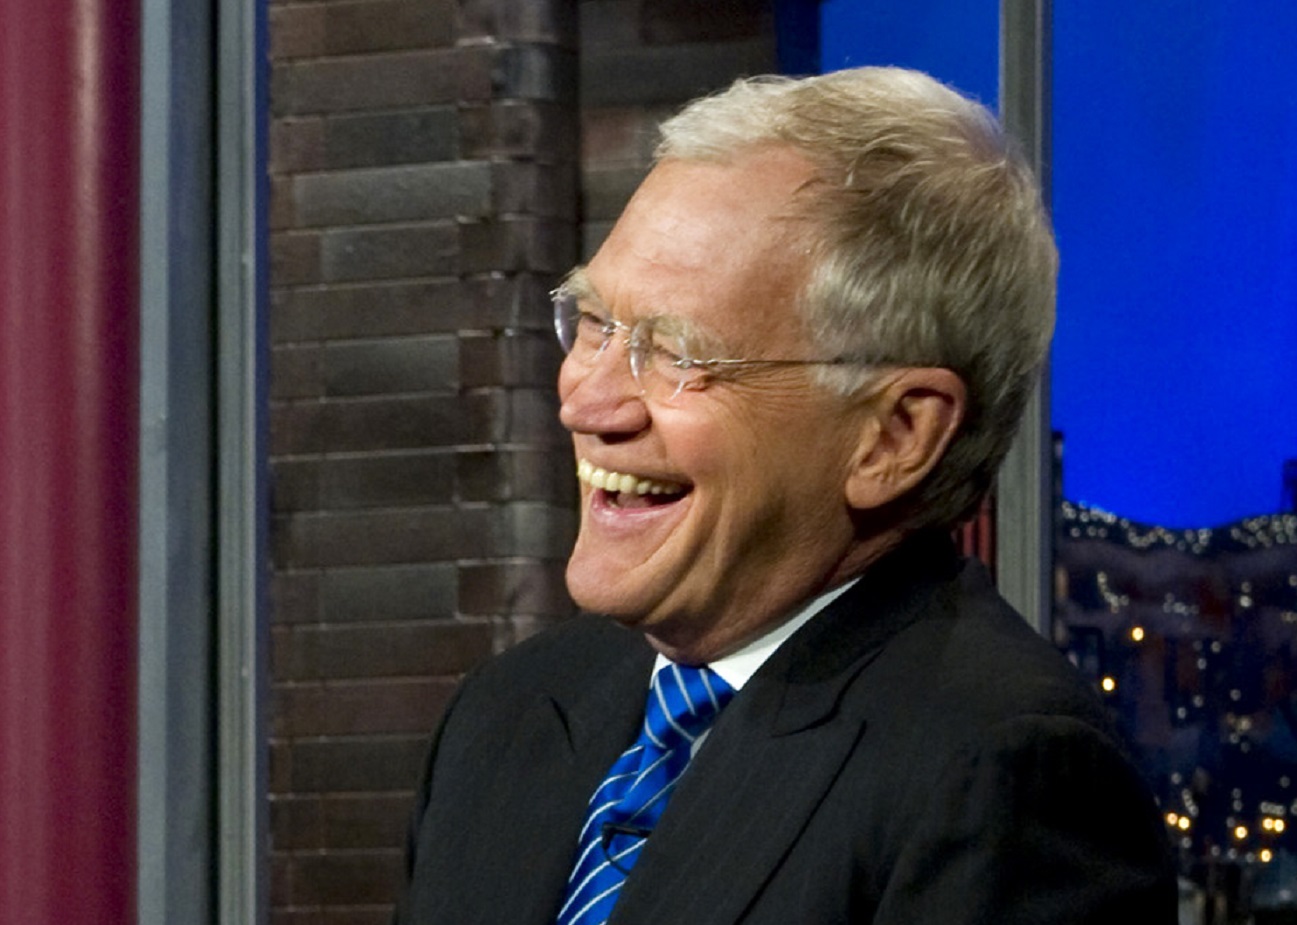 David Letterman smiling and looking at side - 2011